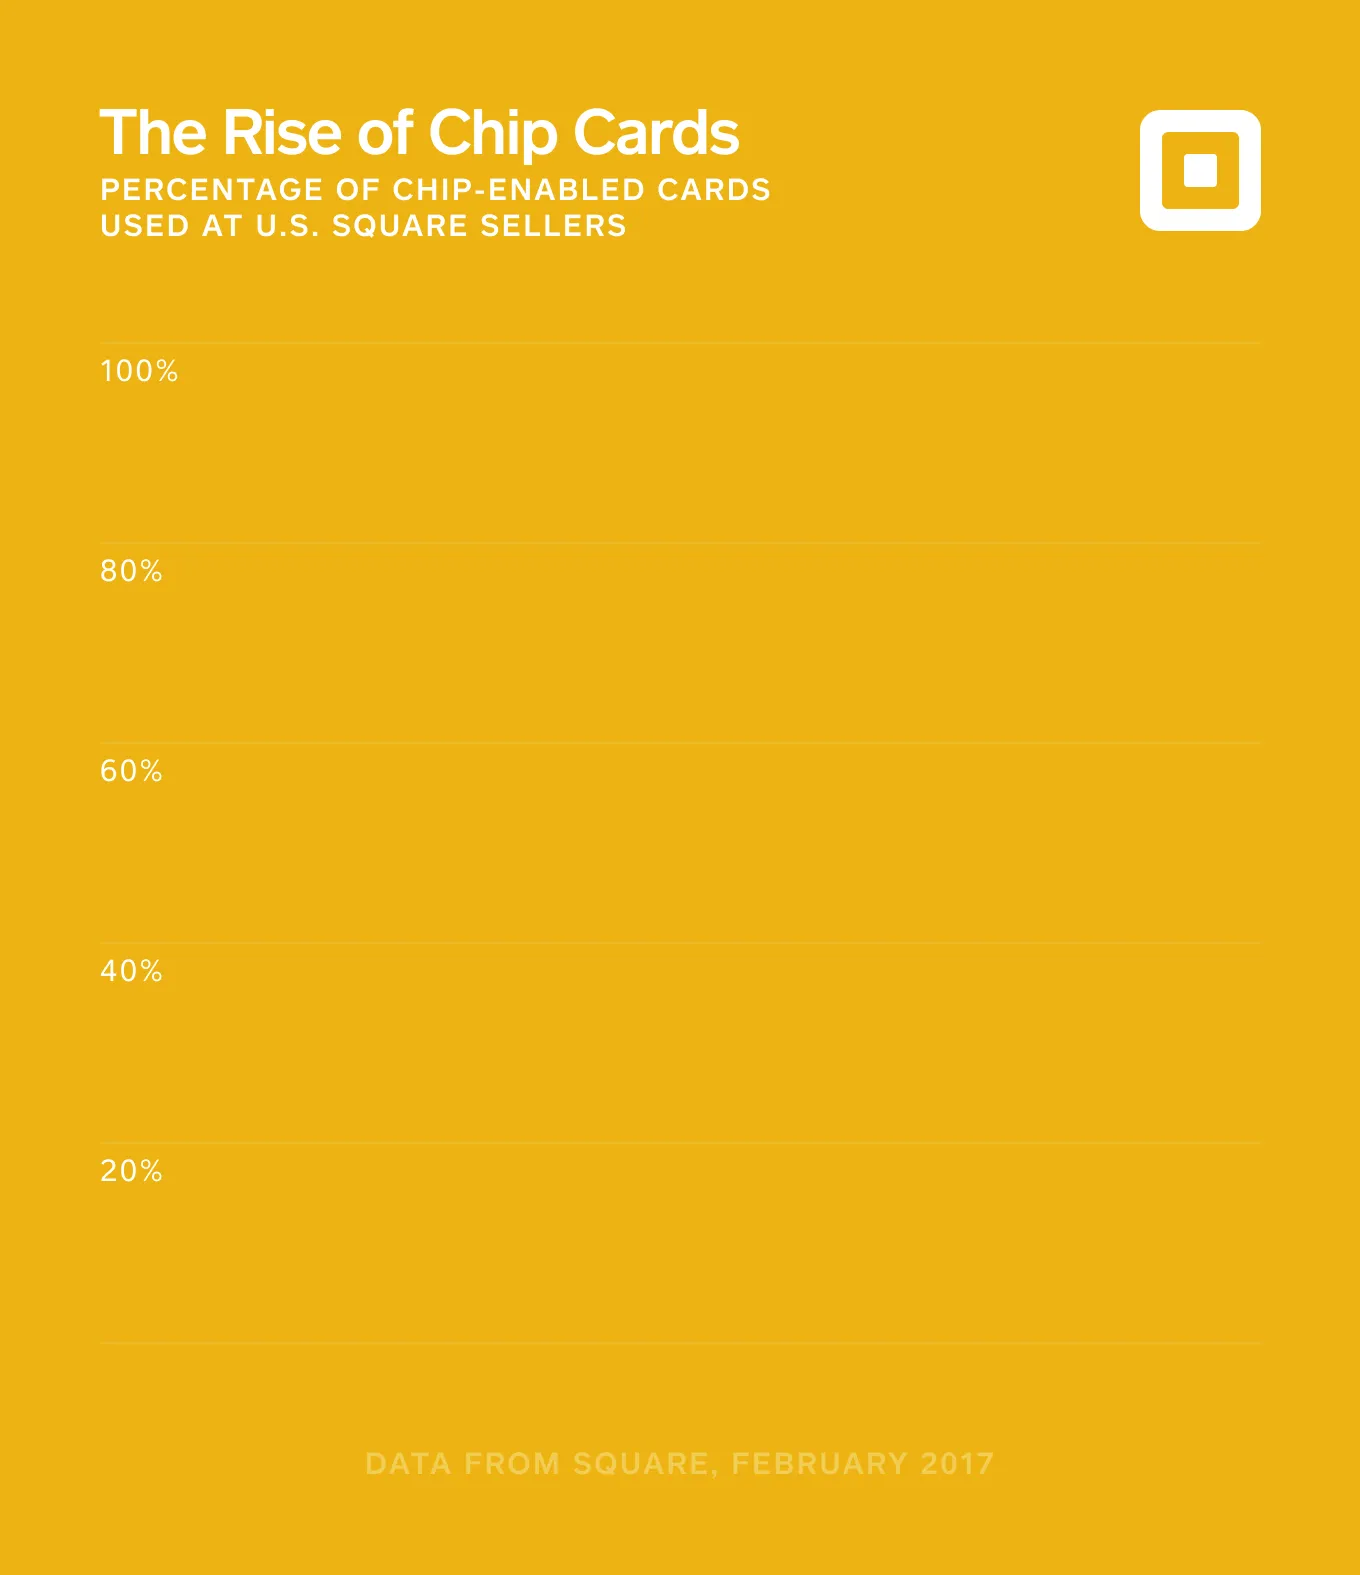 Chip cards are on the quick rise in the United States.